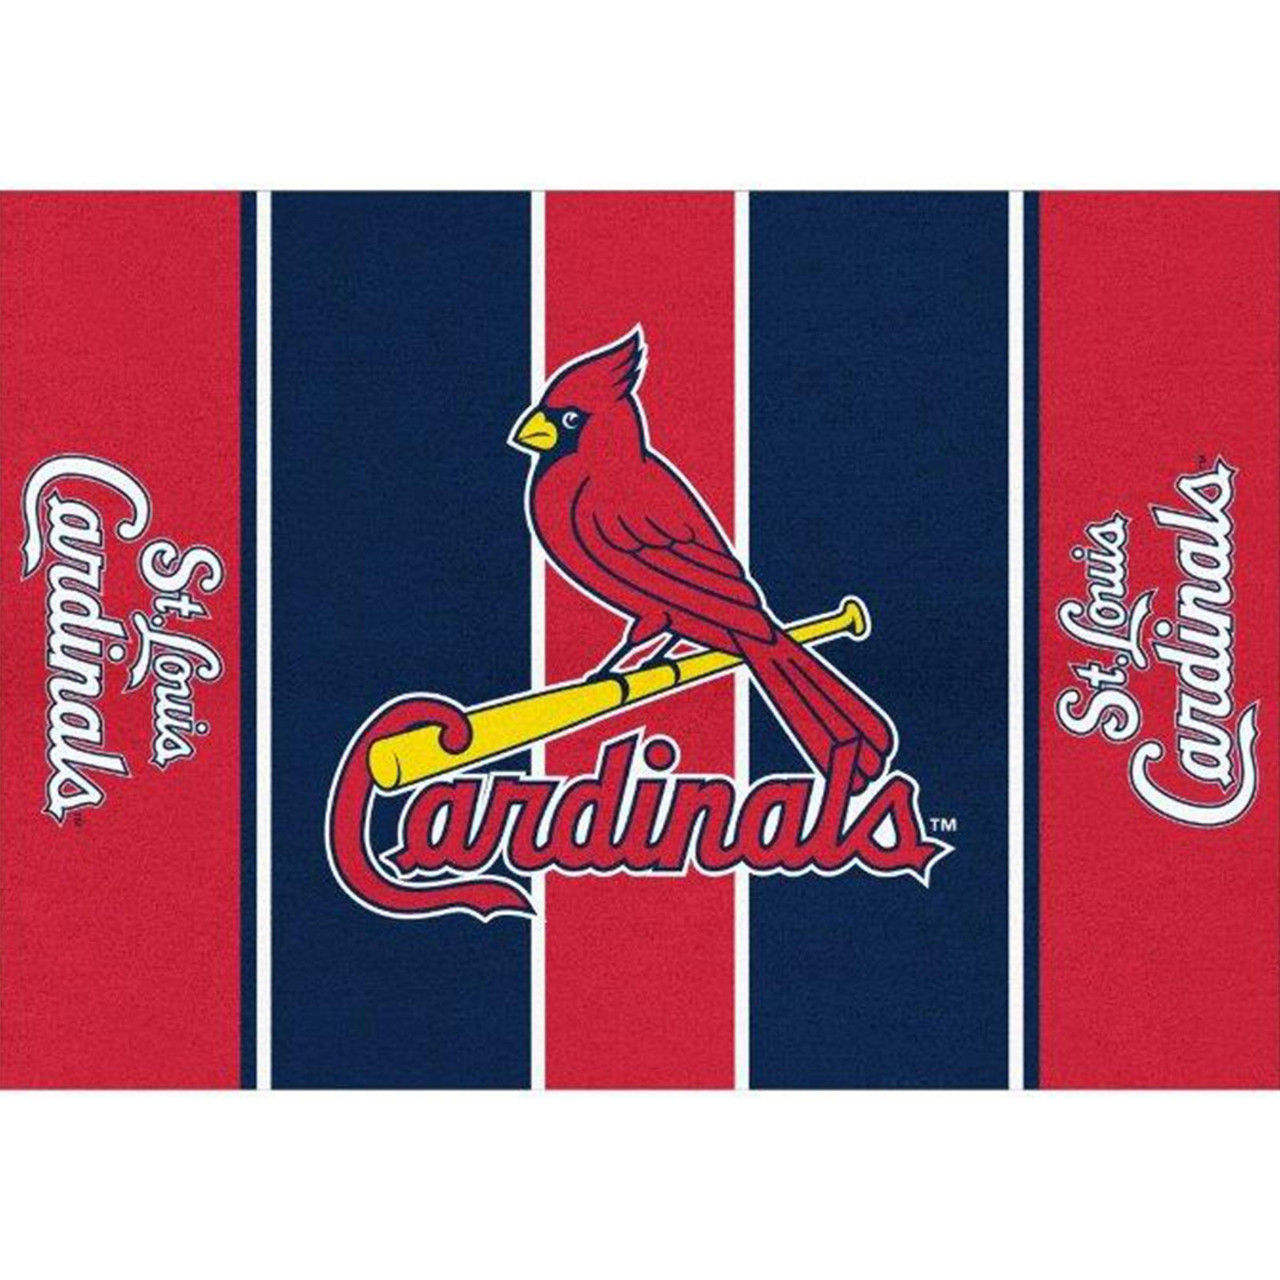 543-2008, St. Louis Cardinals, 8'x11', Victory, Area, Rug, Imperial, MLB,720801432083, Stainmaster